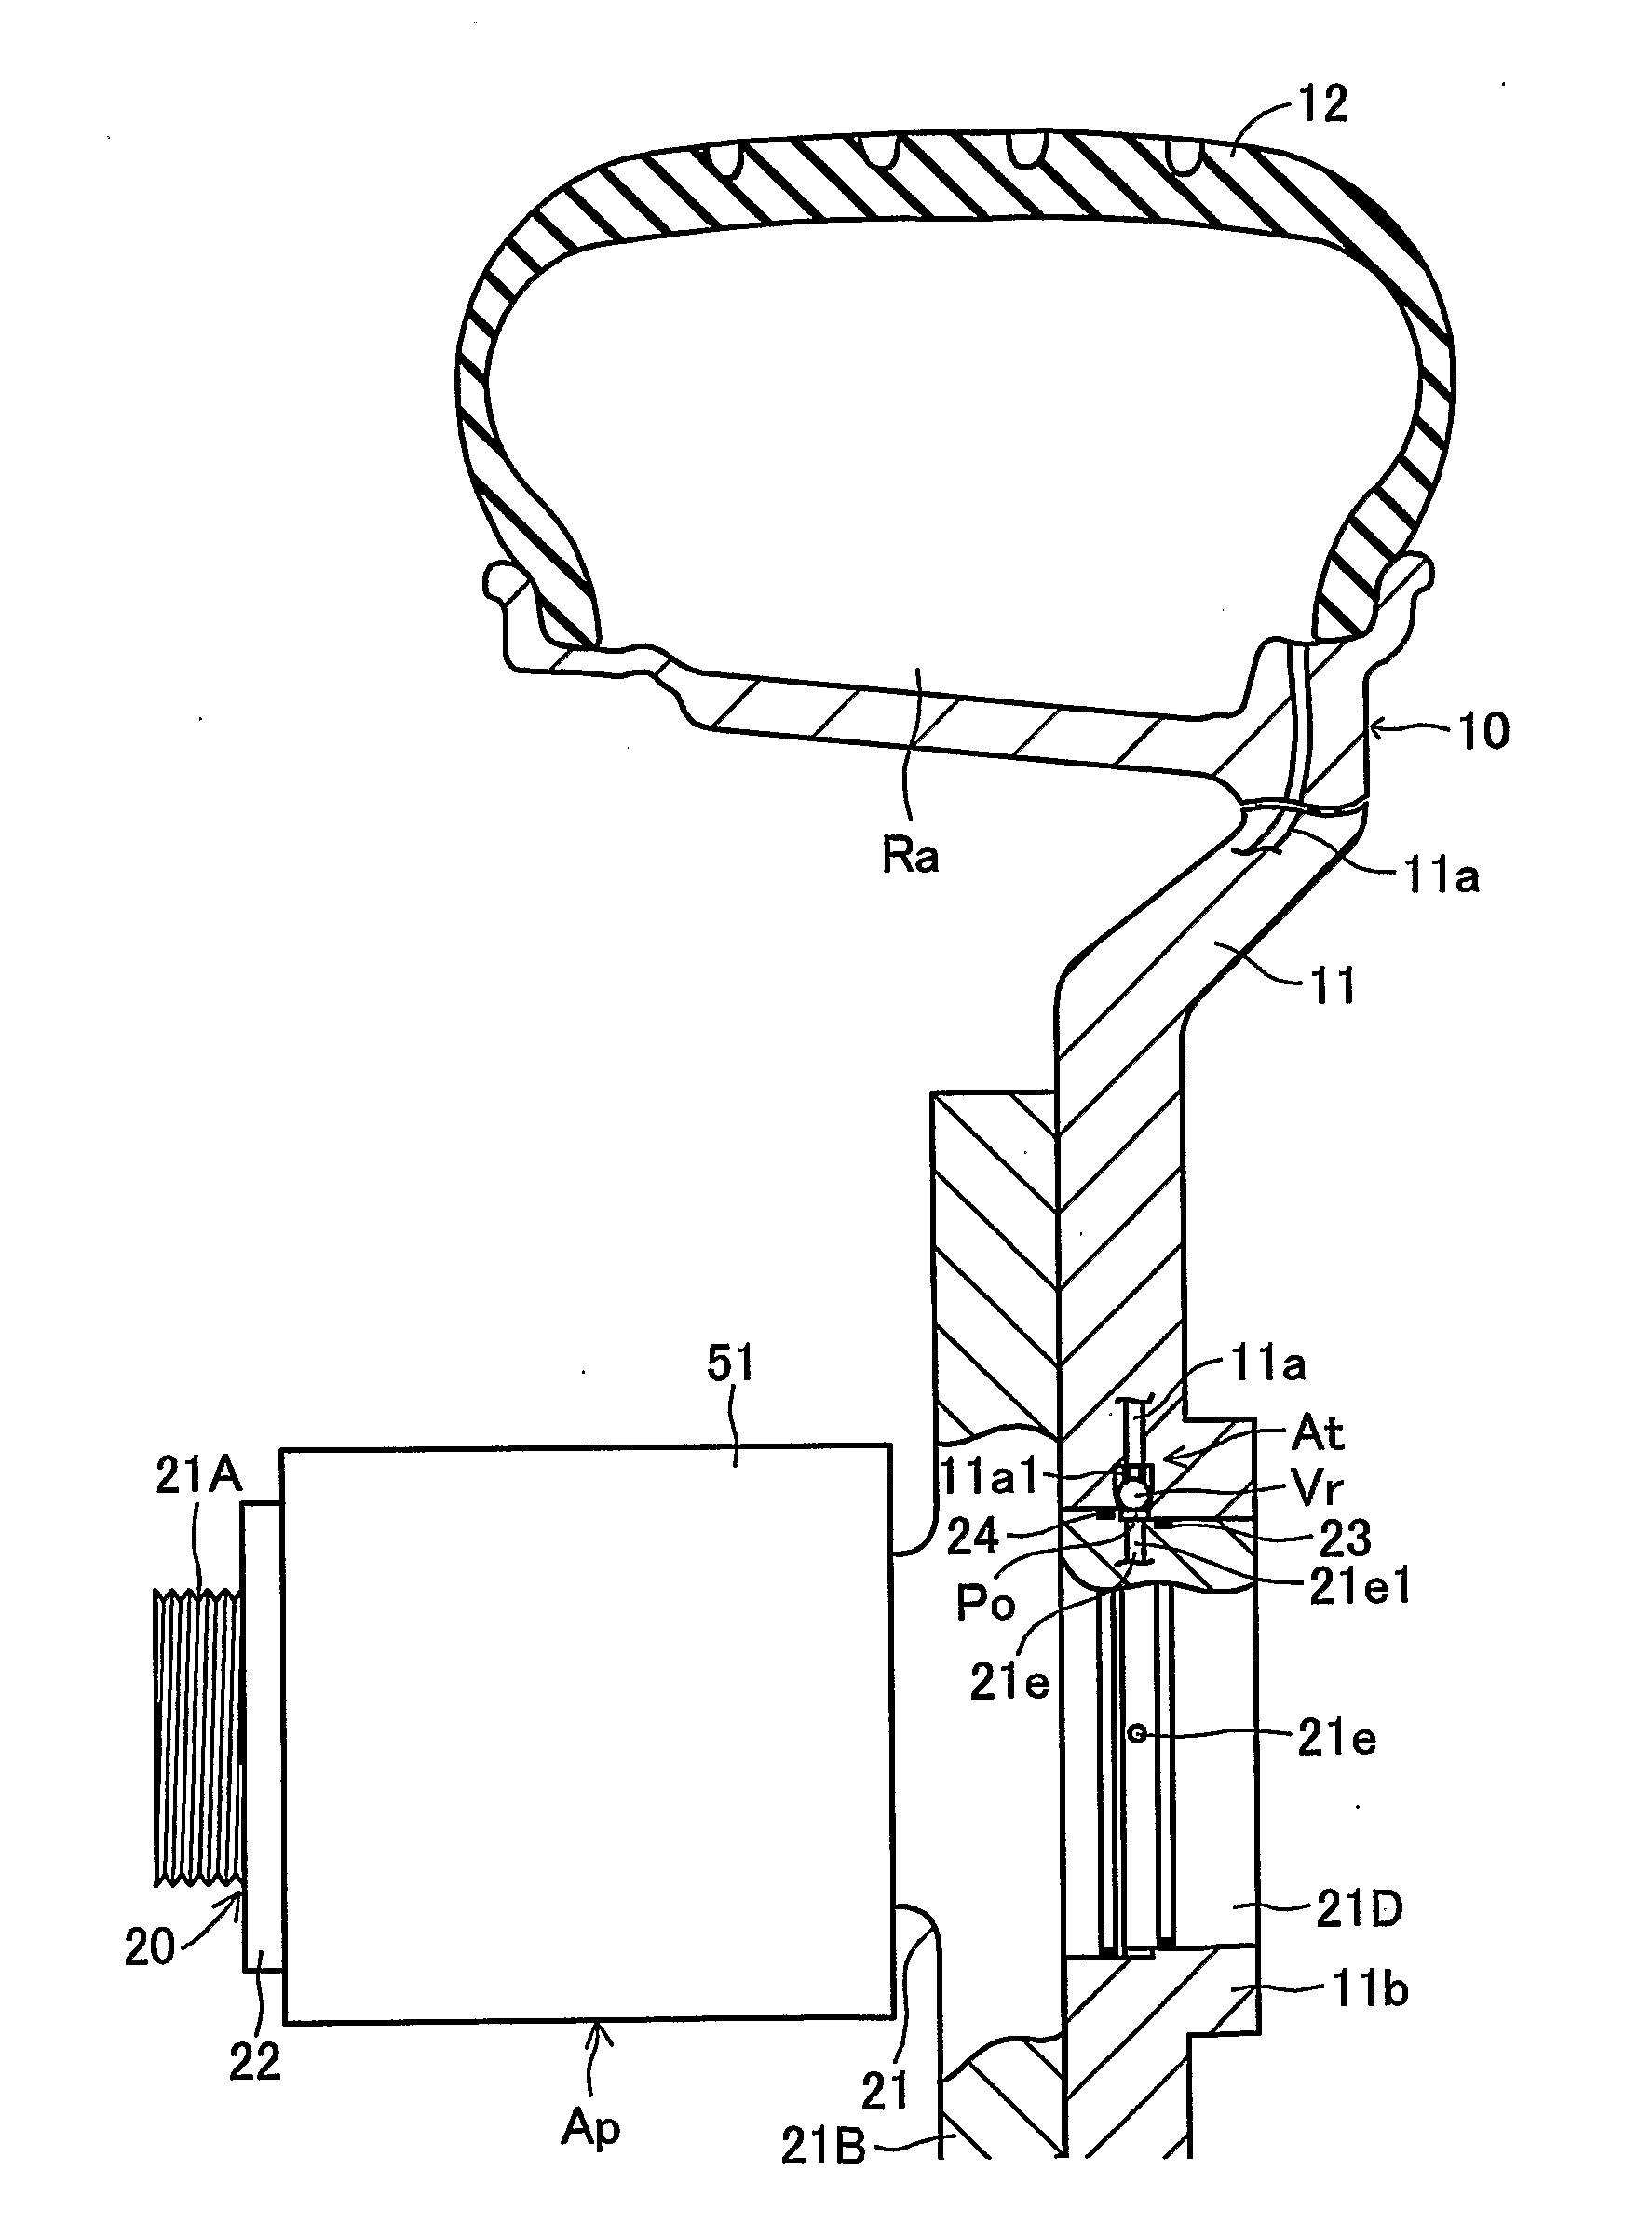 Apparatus for controlling tire inflation pressure